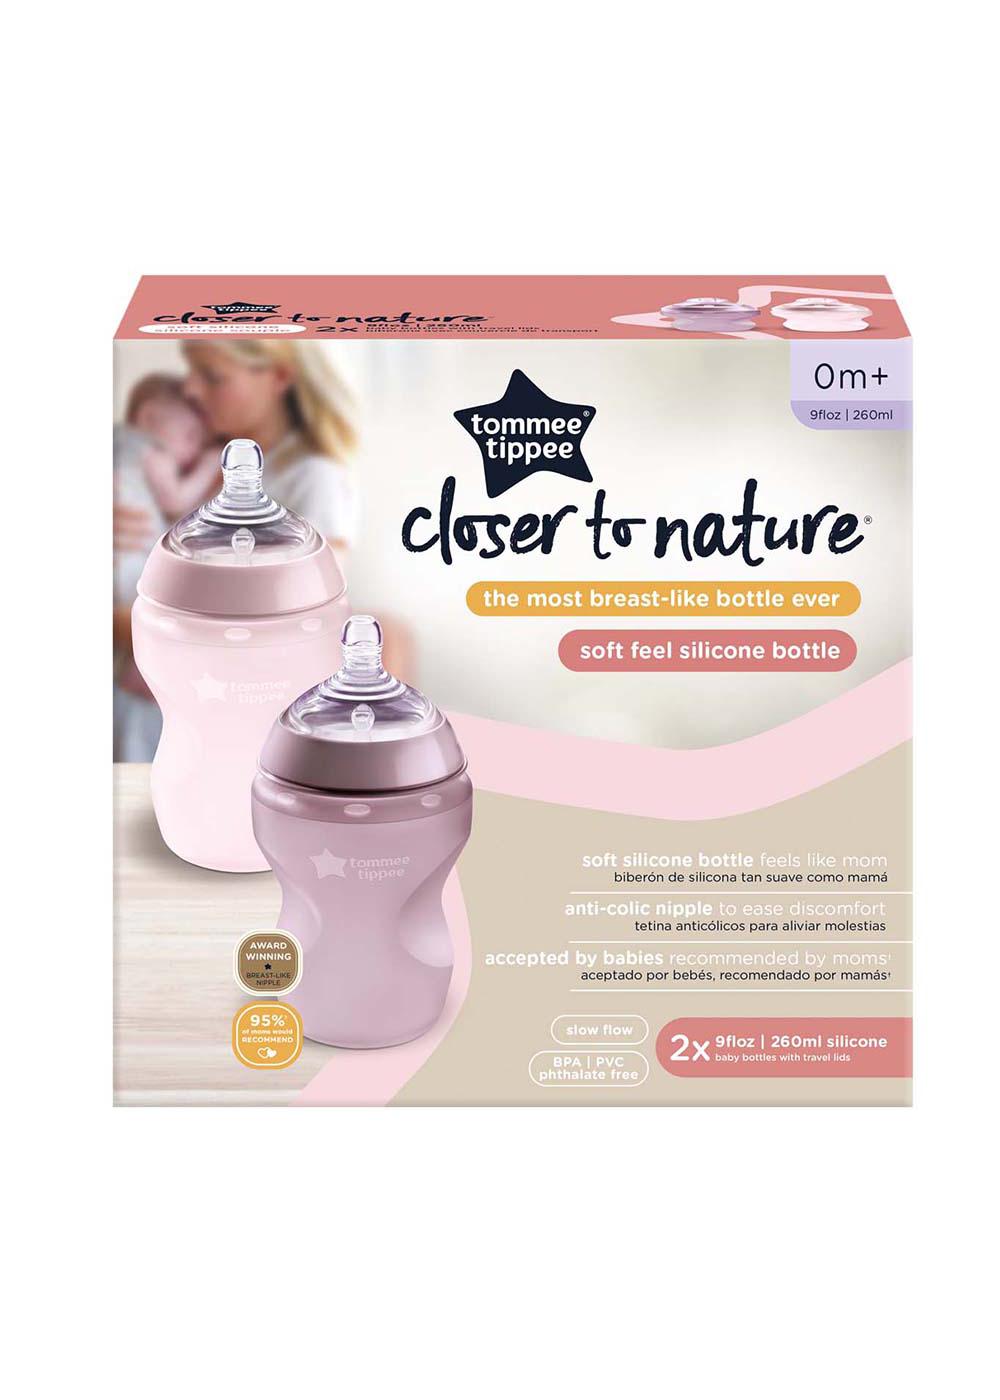 Tommee Tippee Closer To Nature 9 oz Silicone Bottles; image 1 of 2